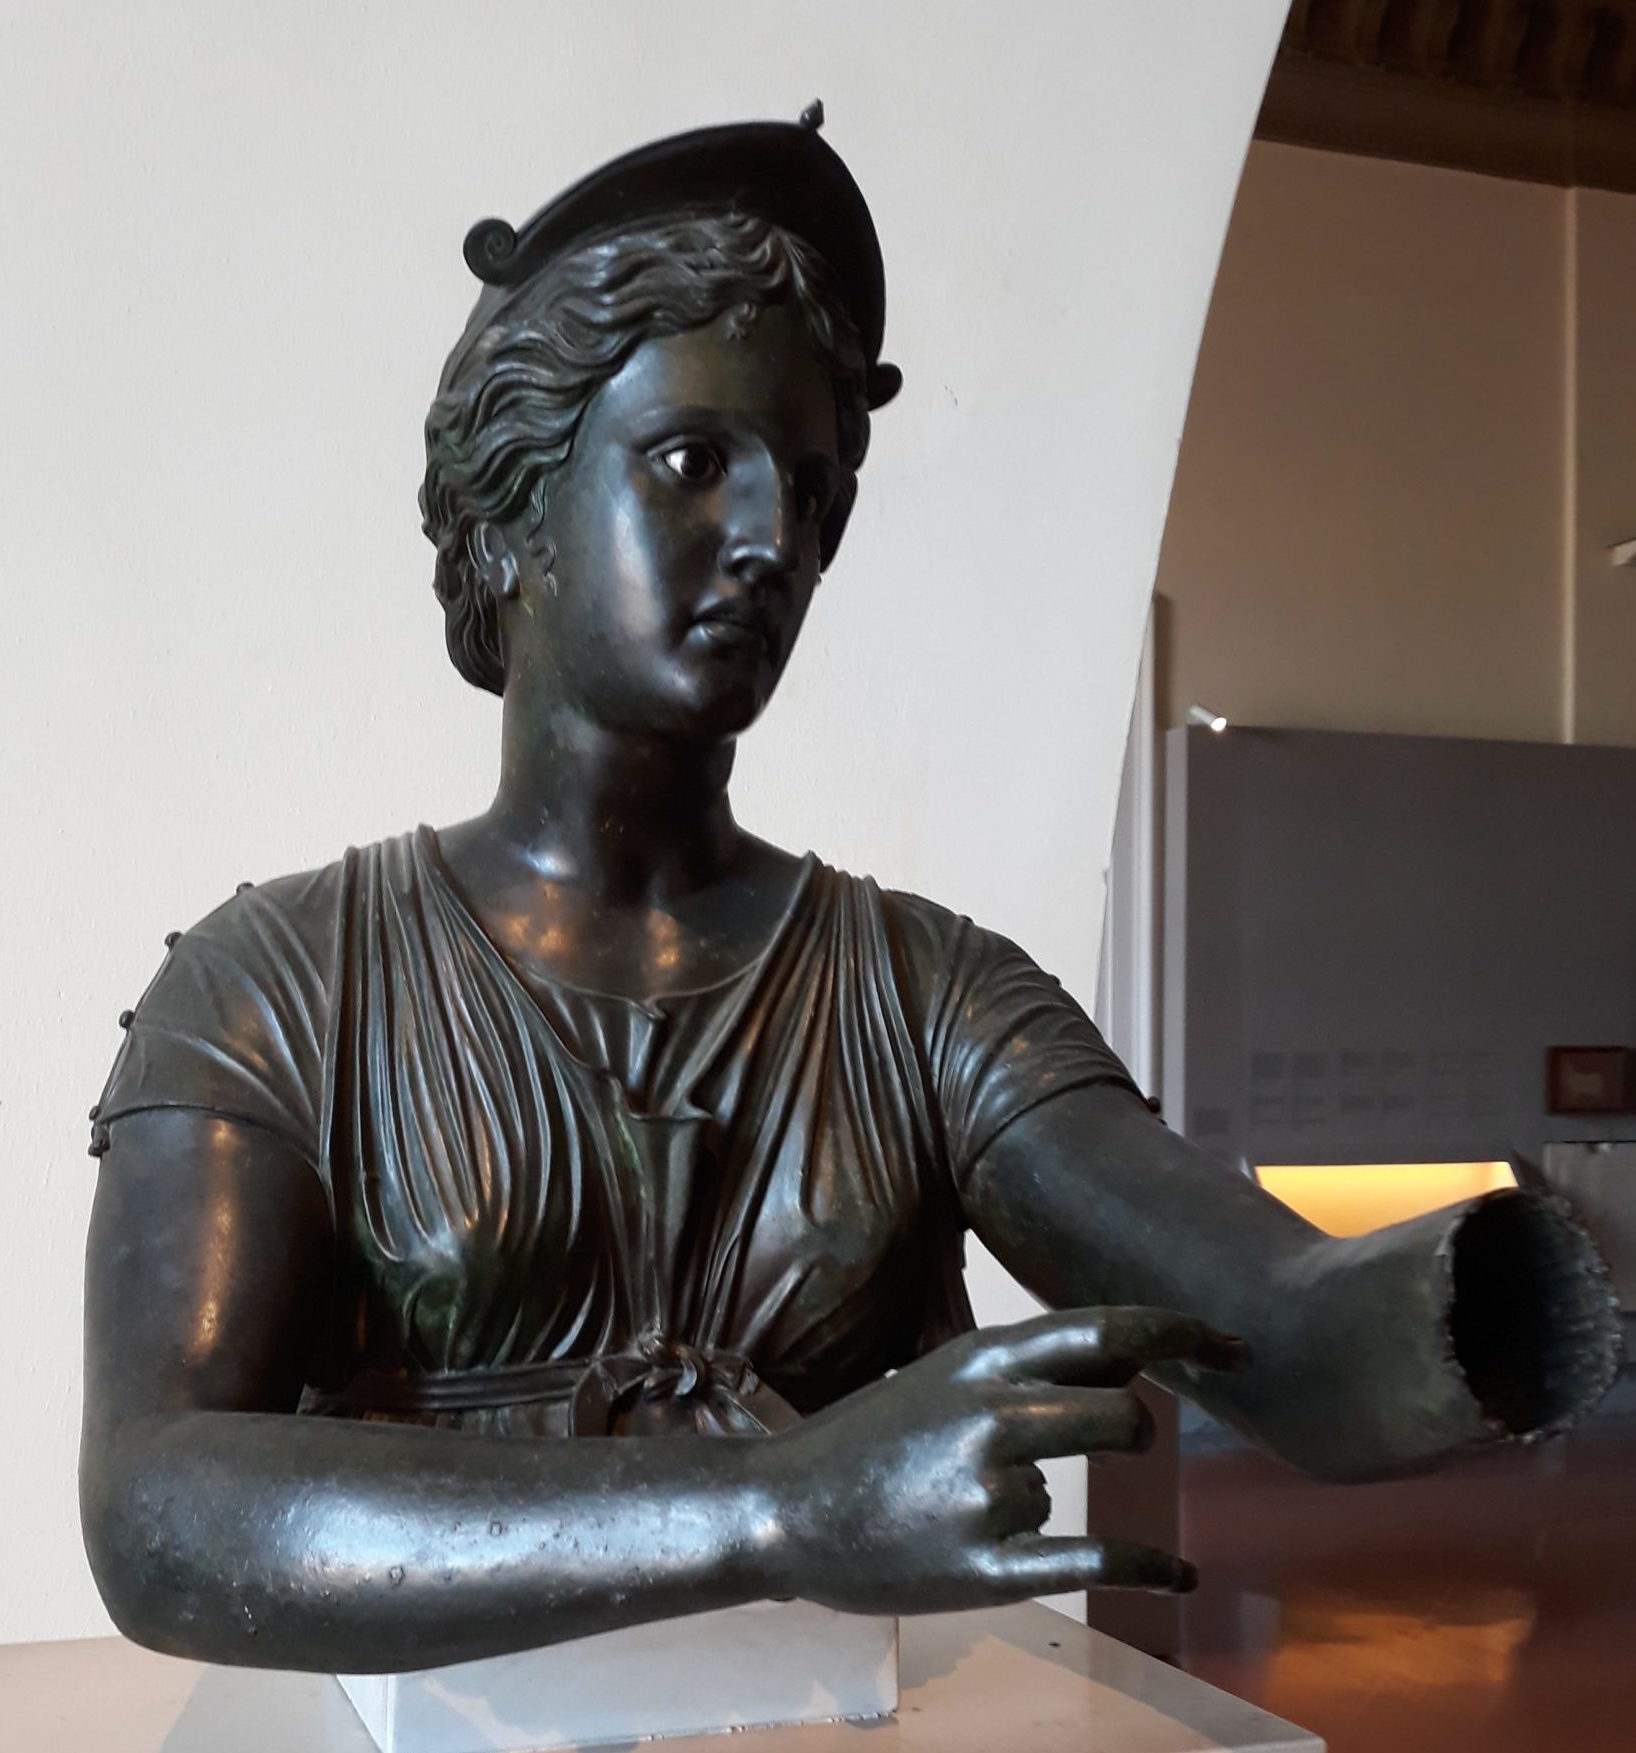 Sculpture of dark bronze of the head and shoulders of Artemis. She has her arms held out in front of her as if she was holding a bow. She wears a crown and is dressed in simple sleeveless garb.